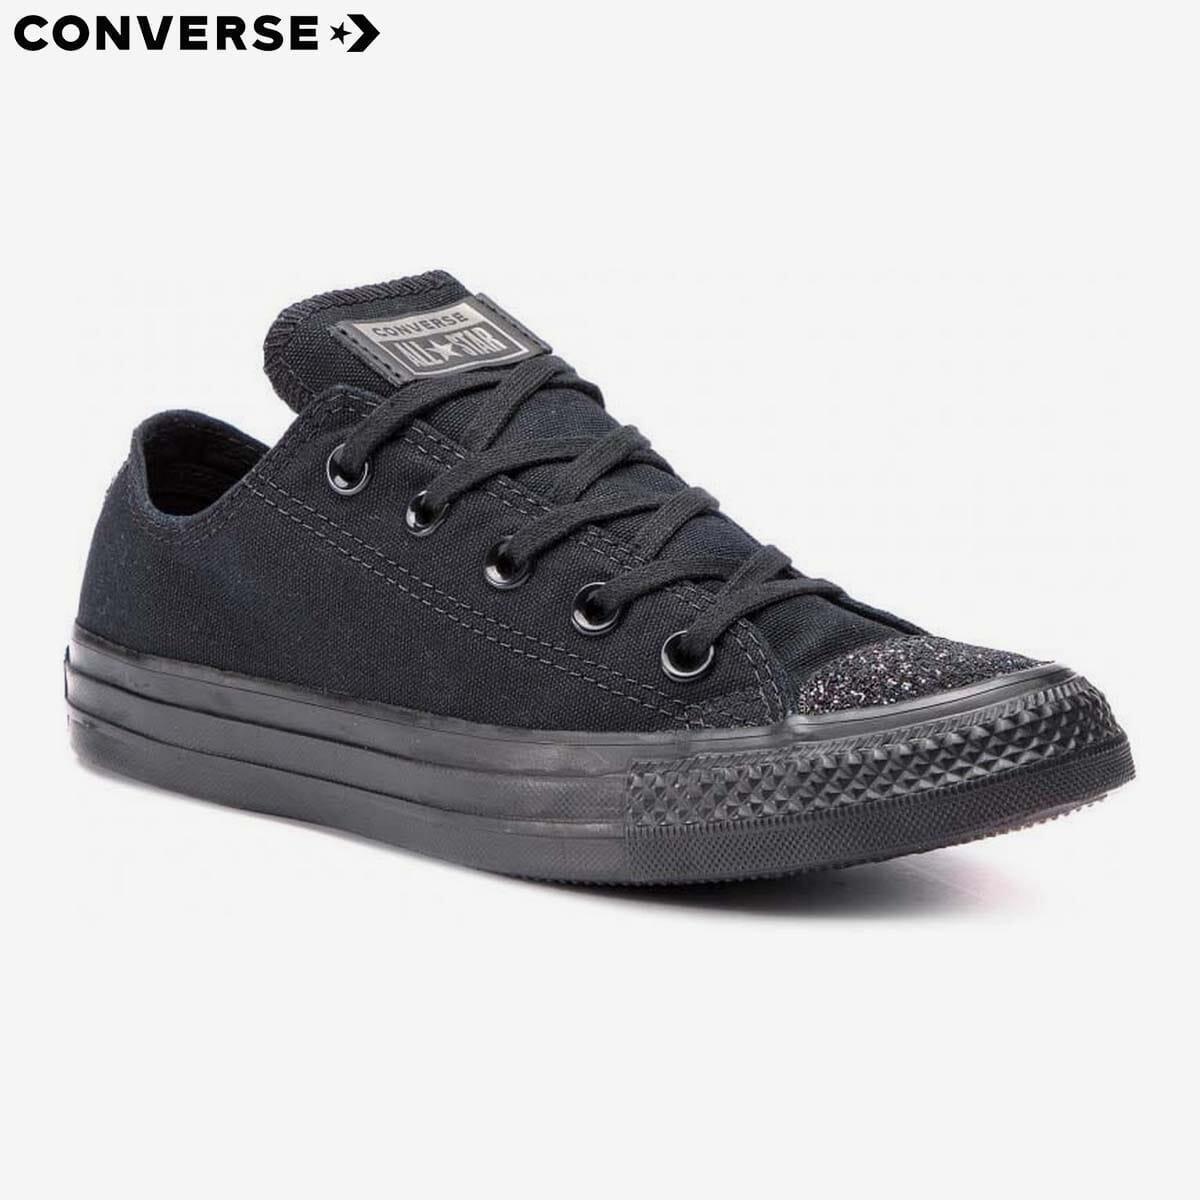 converse black chuck taylor all star low top sneakers for unisex 563465c